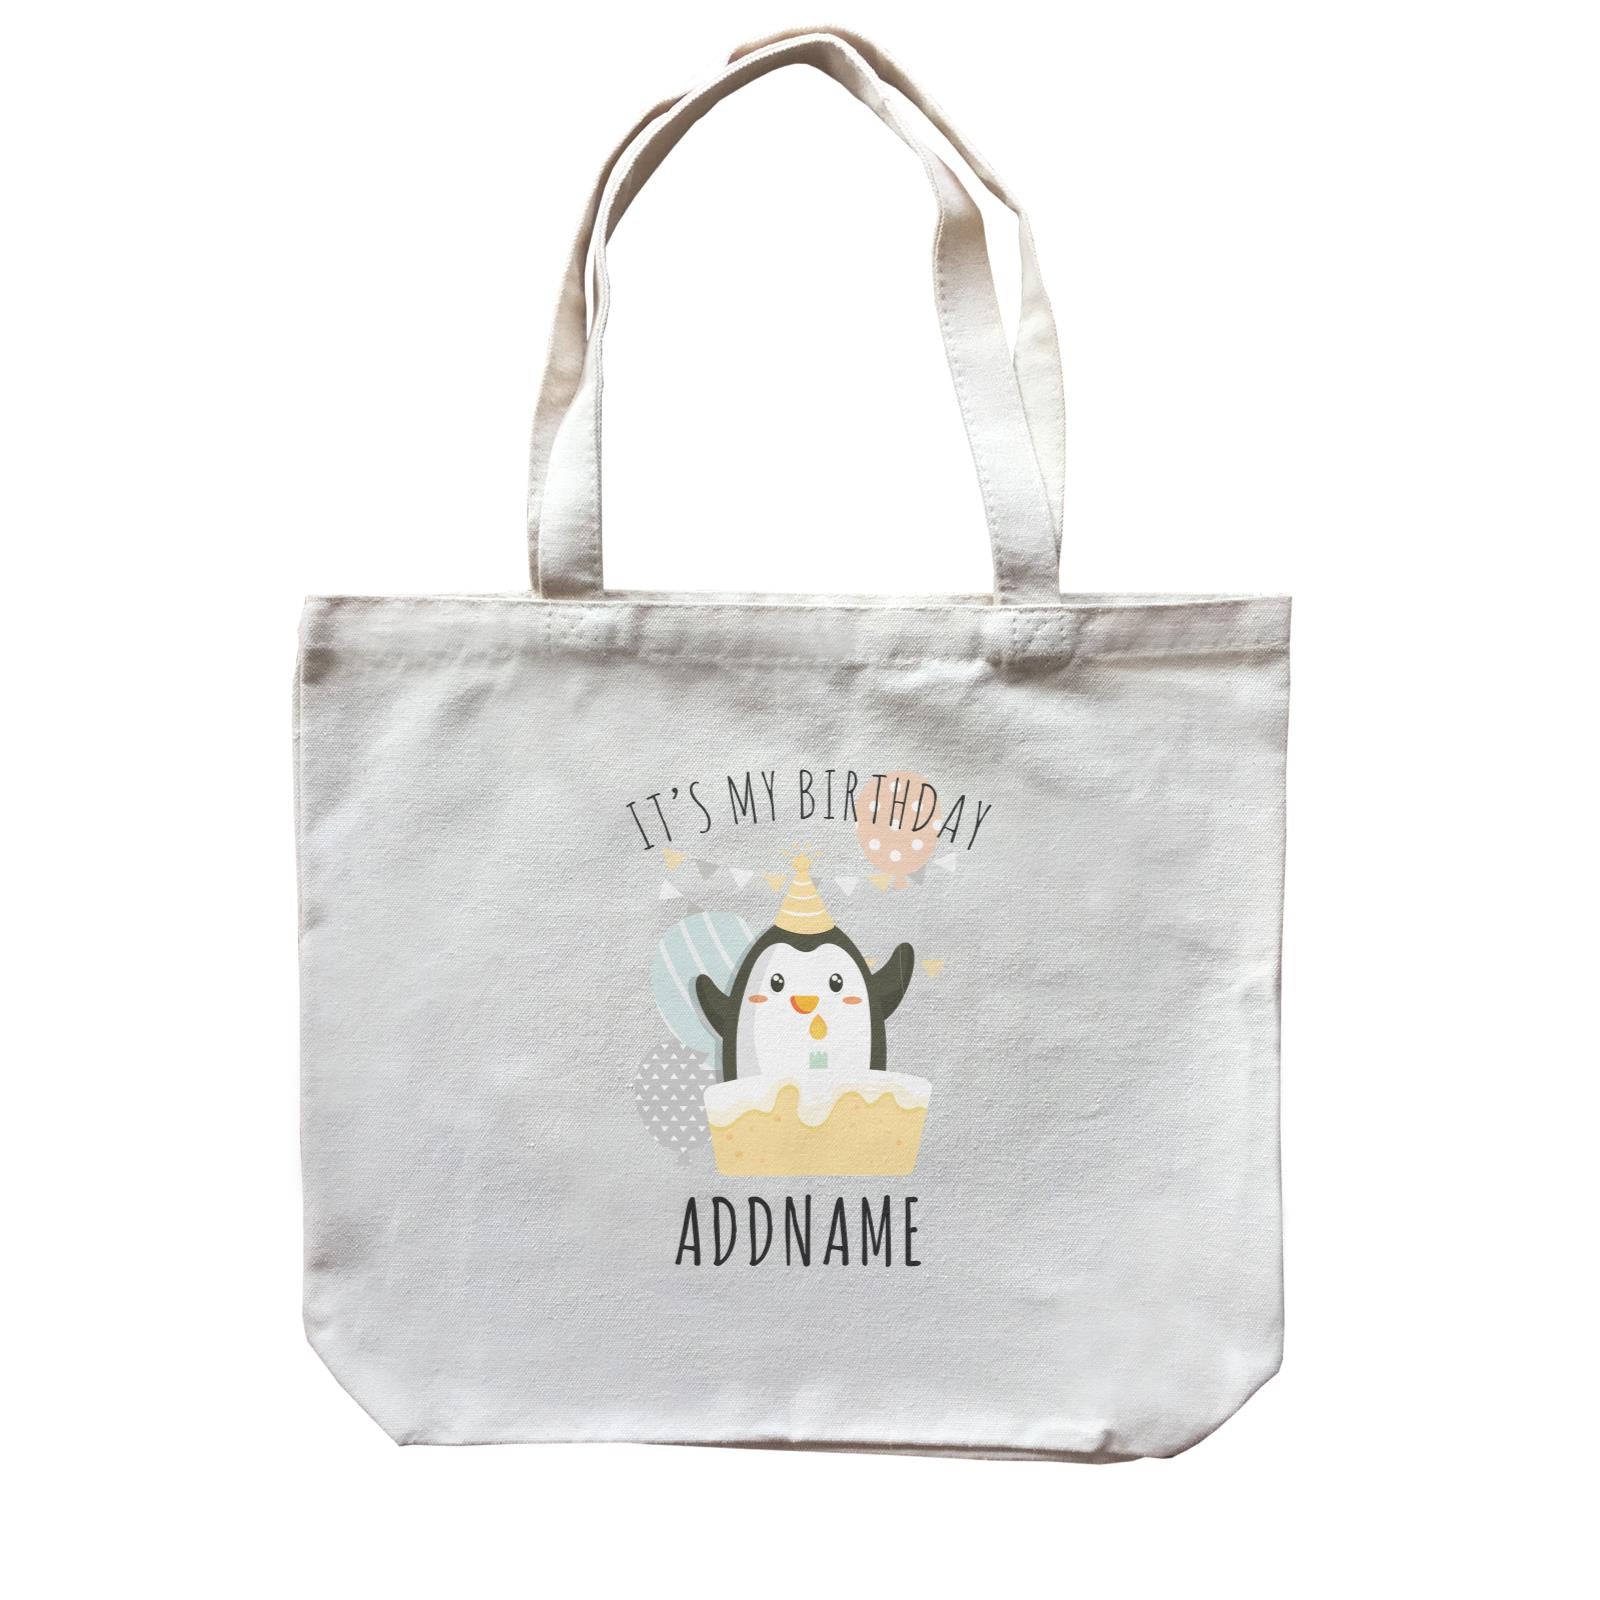 Birthday Cute Penguin And Cake It's My Birthday Addname Canvas Bag